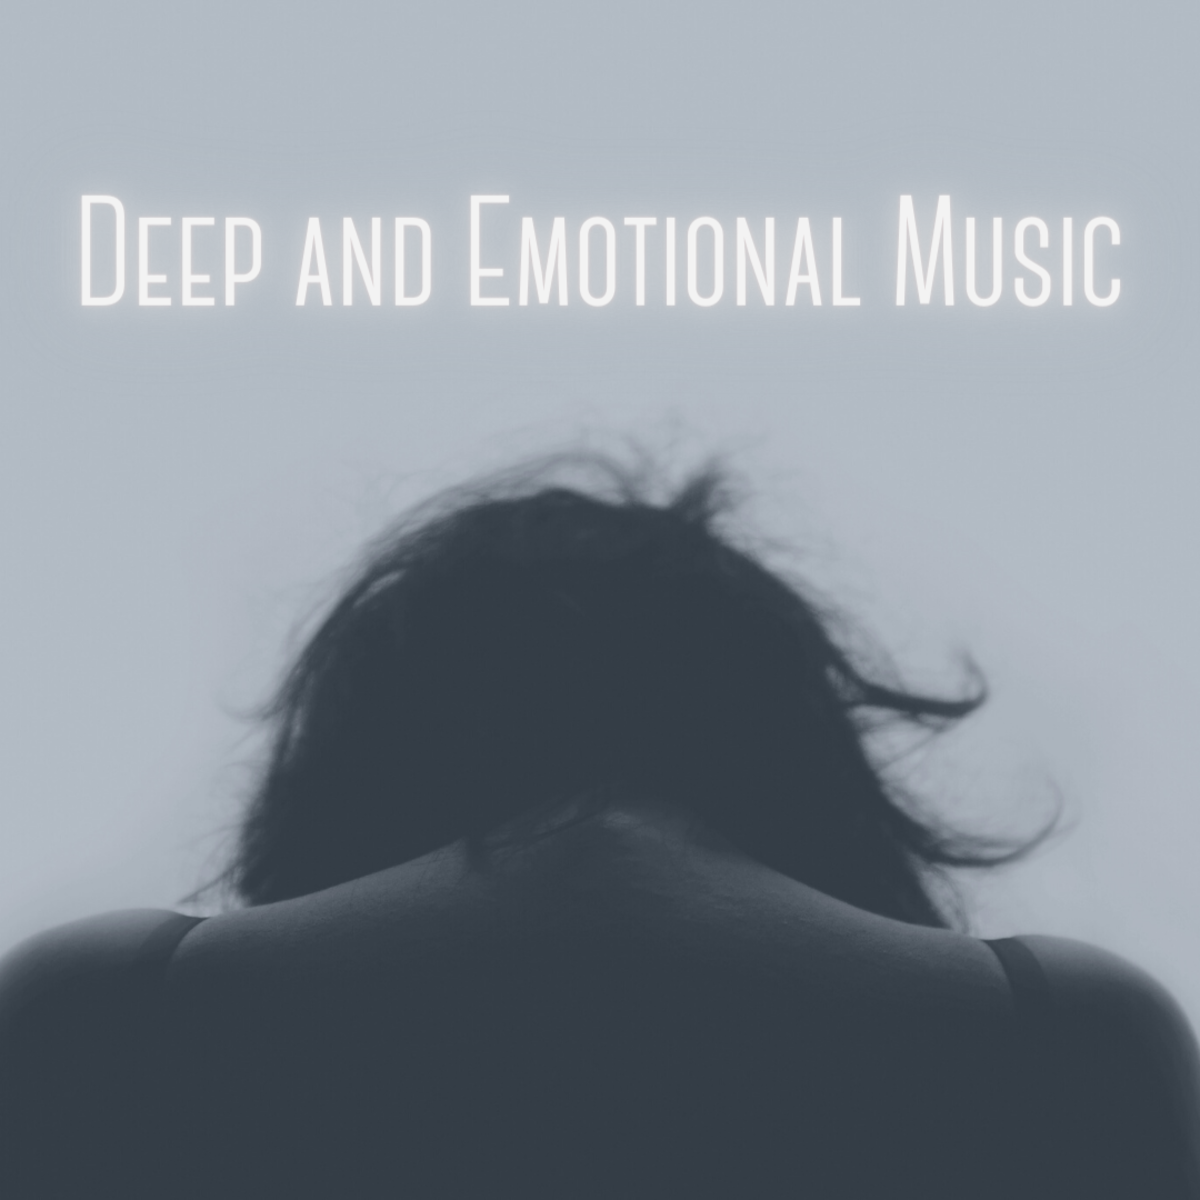 34 Beautiful, Emotional Songs to Be Sad, Reflective, Depressed, and Melancholy to